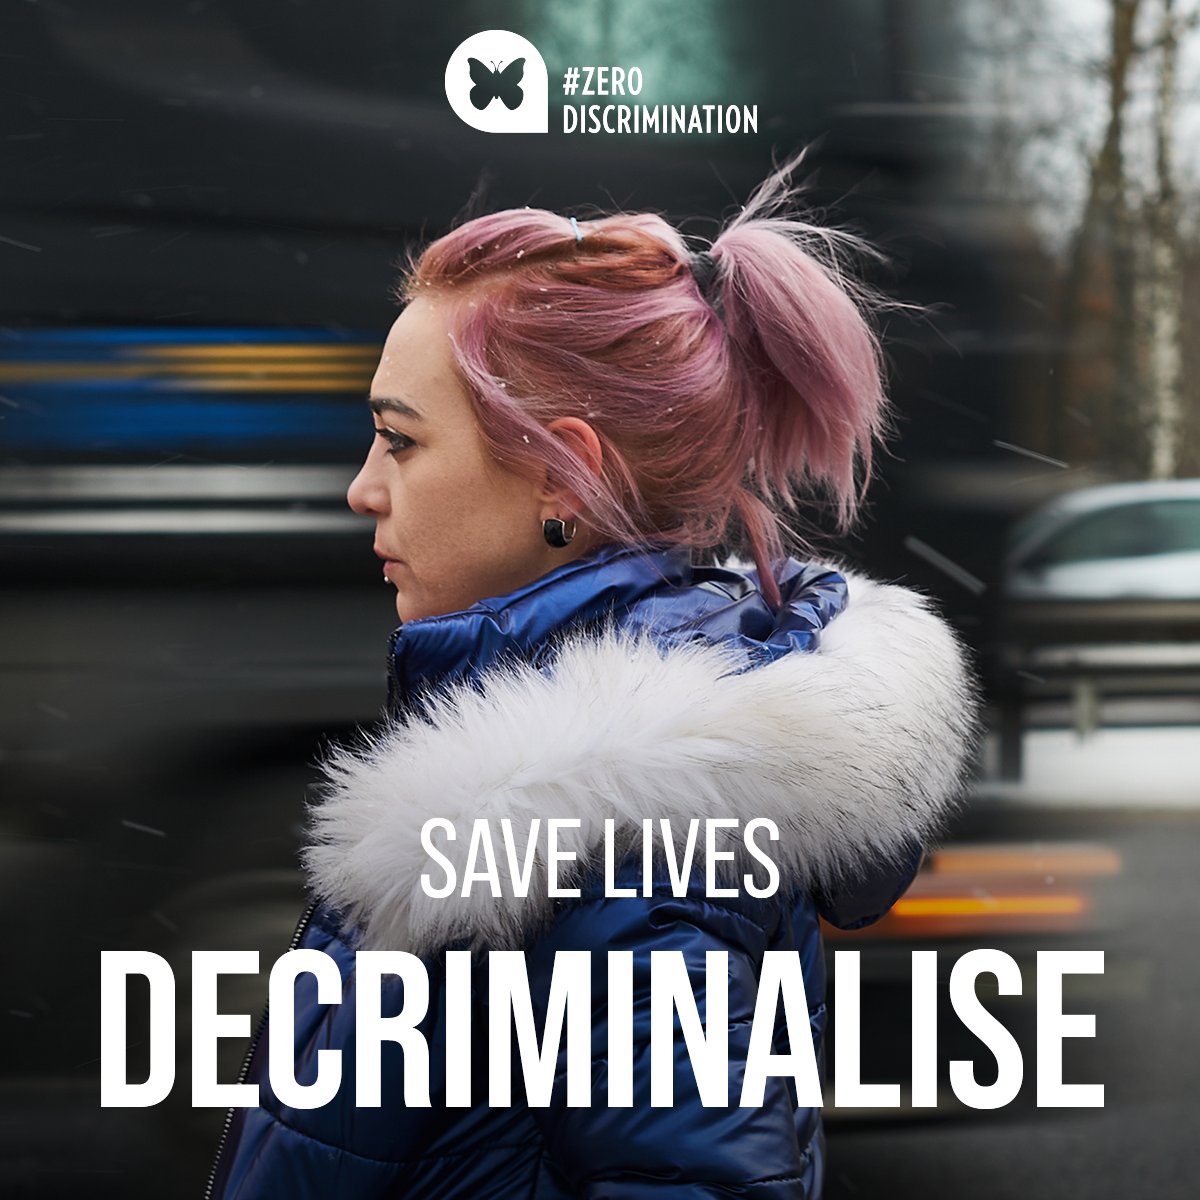 Laws criminalizing sex work, gender identity, sexuality or drug use can have a devastating impact on people's lives. Removing these laws & creating an enabling environment will advance human rights, including the right to health. Save lives: decriminalize! #ZeroDiscrimination